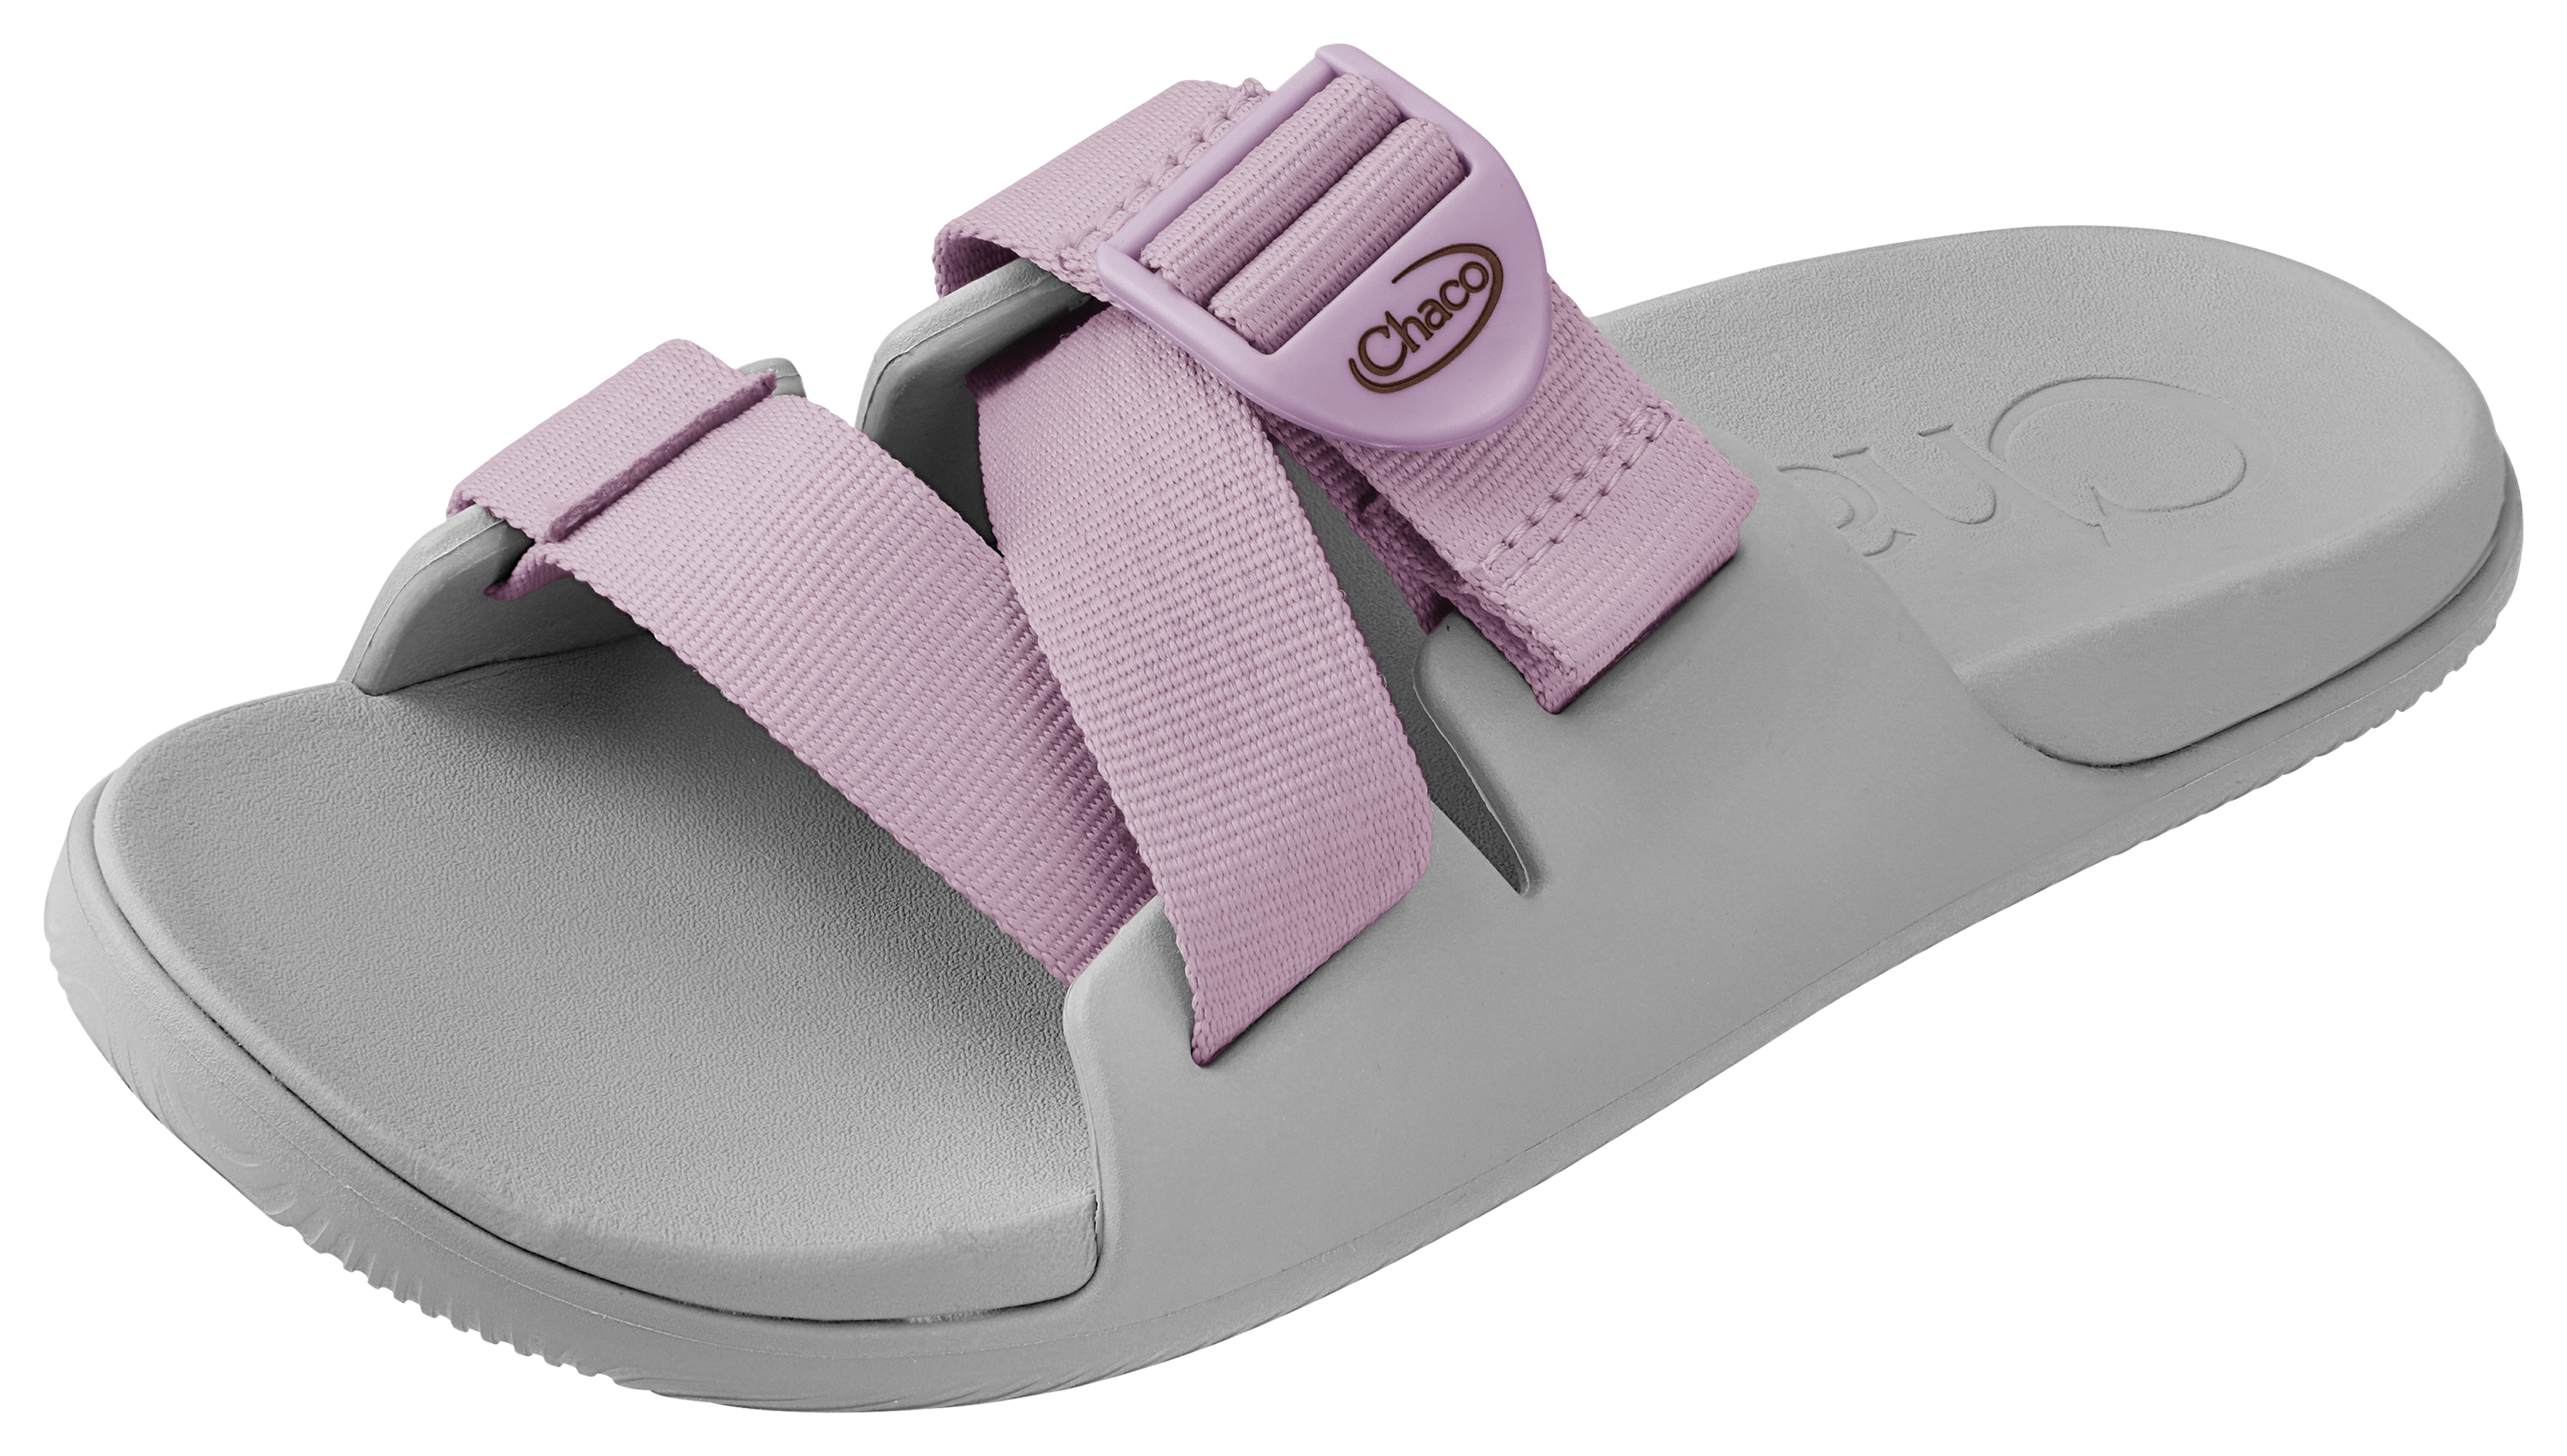 Chaco Chillos Slide Sandals for Ladies Lavender 10M